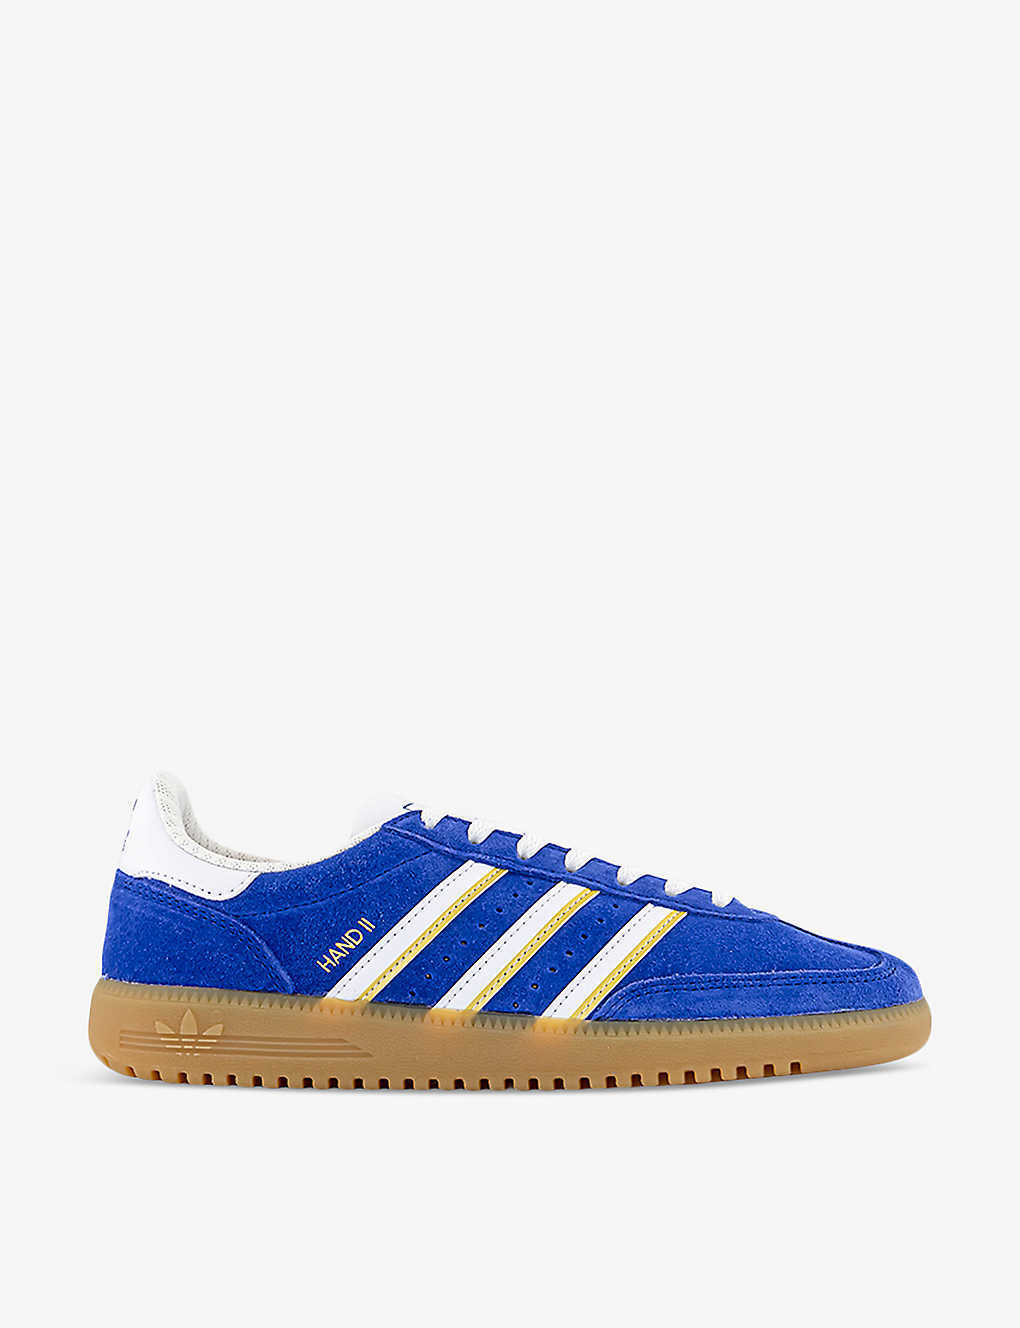 Adidas Originals Hand 2 Sneaker In Selubl/ftwwht/magold